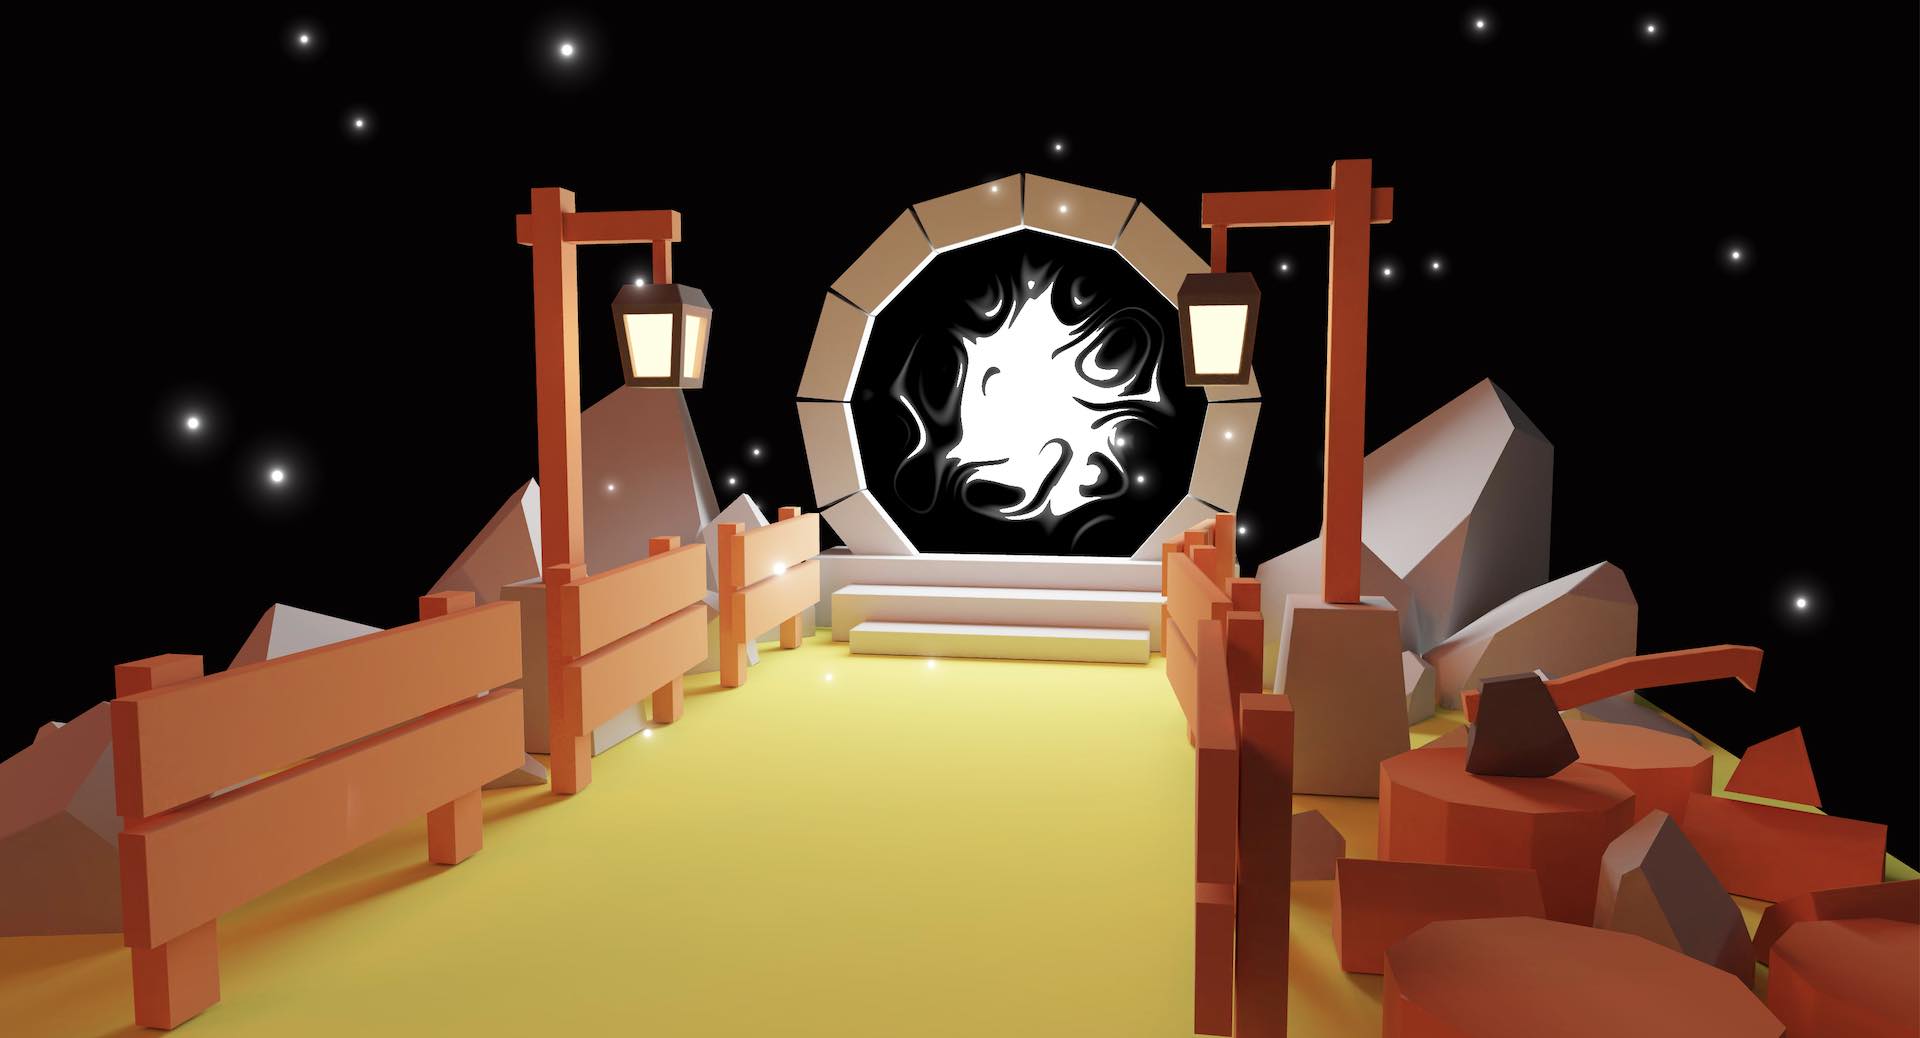 A low-poly 3D scene of a lantern-lit, fenced pathway leading through rocks and tree stumps to a mysterious stone portal. An axe rests in one of the stumps, and fireflies float against a black sky.